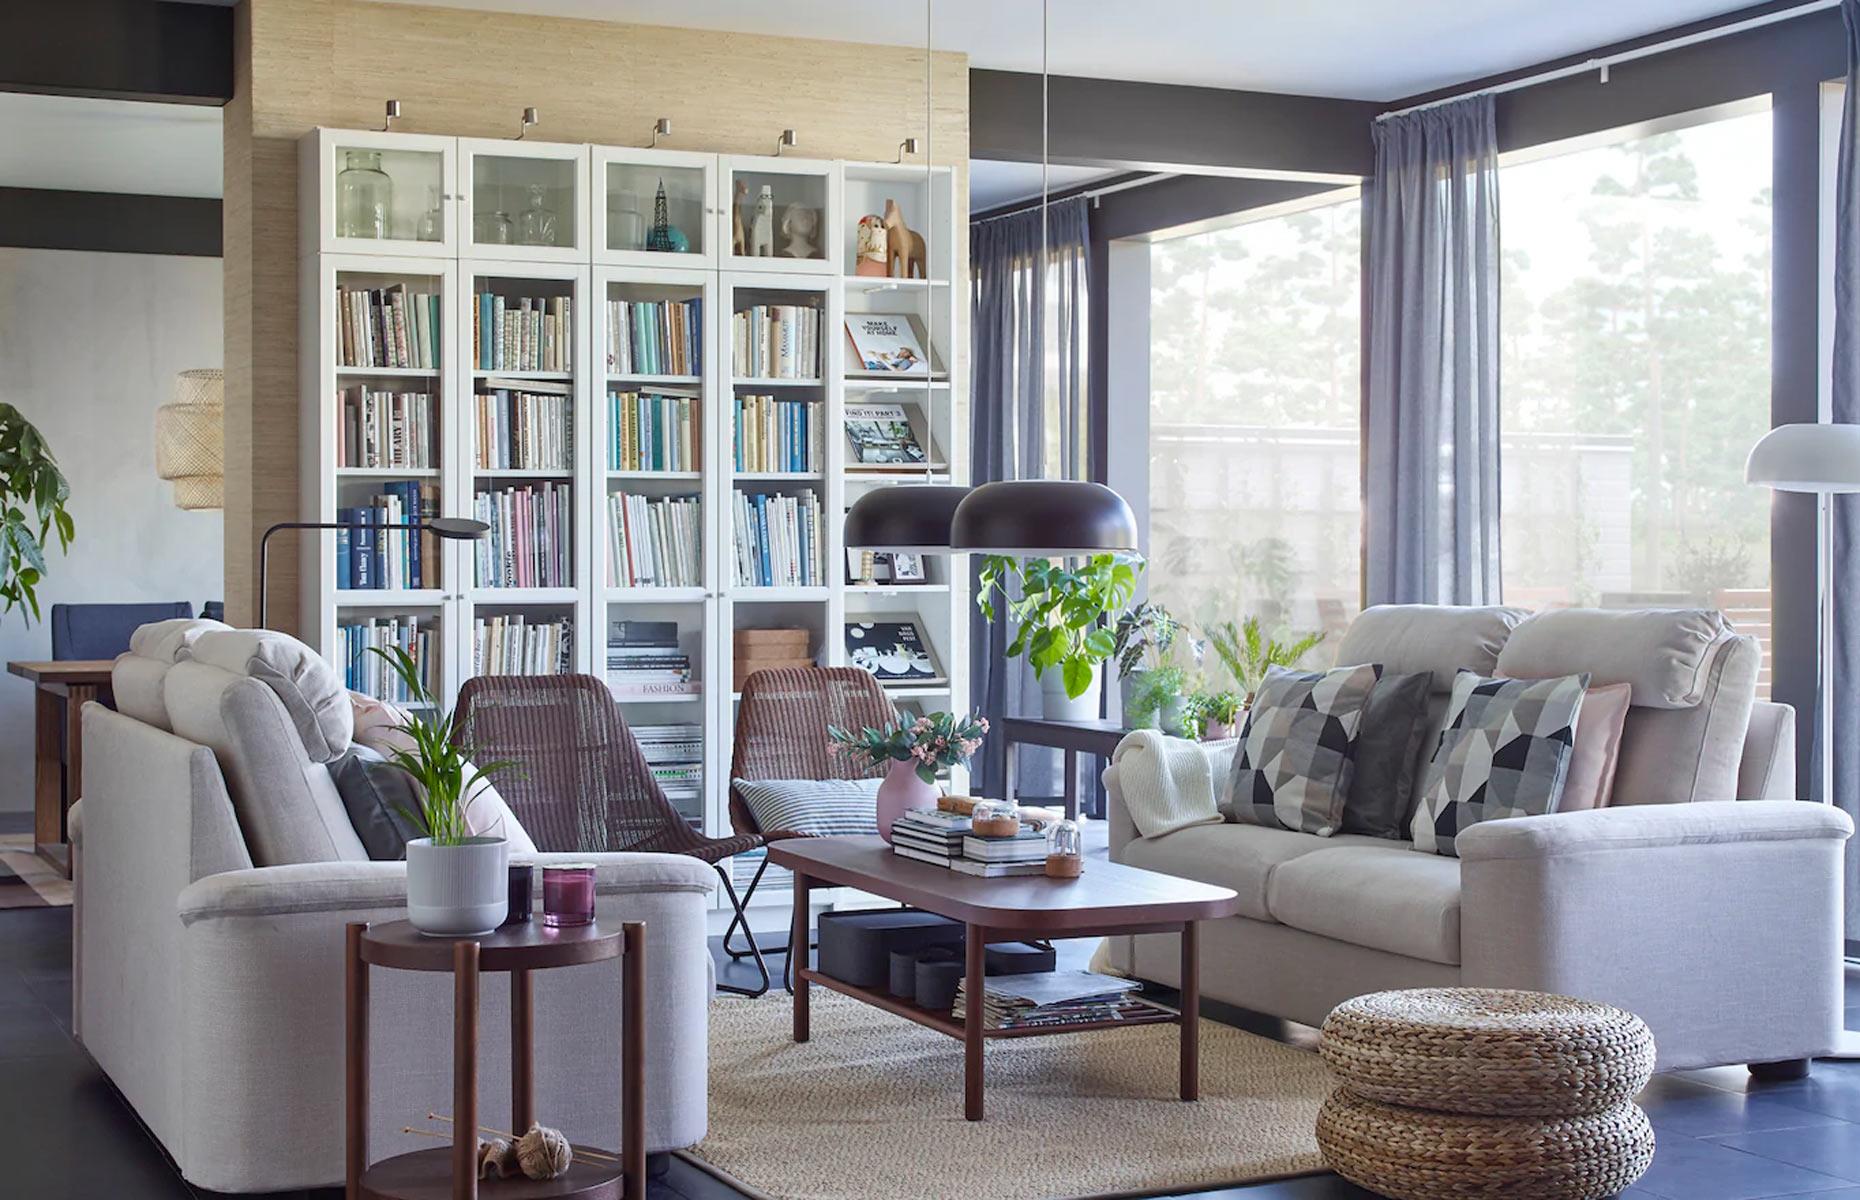 <p>Open-plan living rooms with floor-to-ceiling windows are usually light-filled and airy, however, storage space can become tricky. One solution is to place back-to-back bookshelves in the center of the room as a divider. Glass doors will keep color-coordinated books dust-free and why not install ambient lighting on top to create an atmospheric evening glow too? </p>